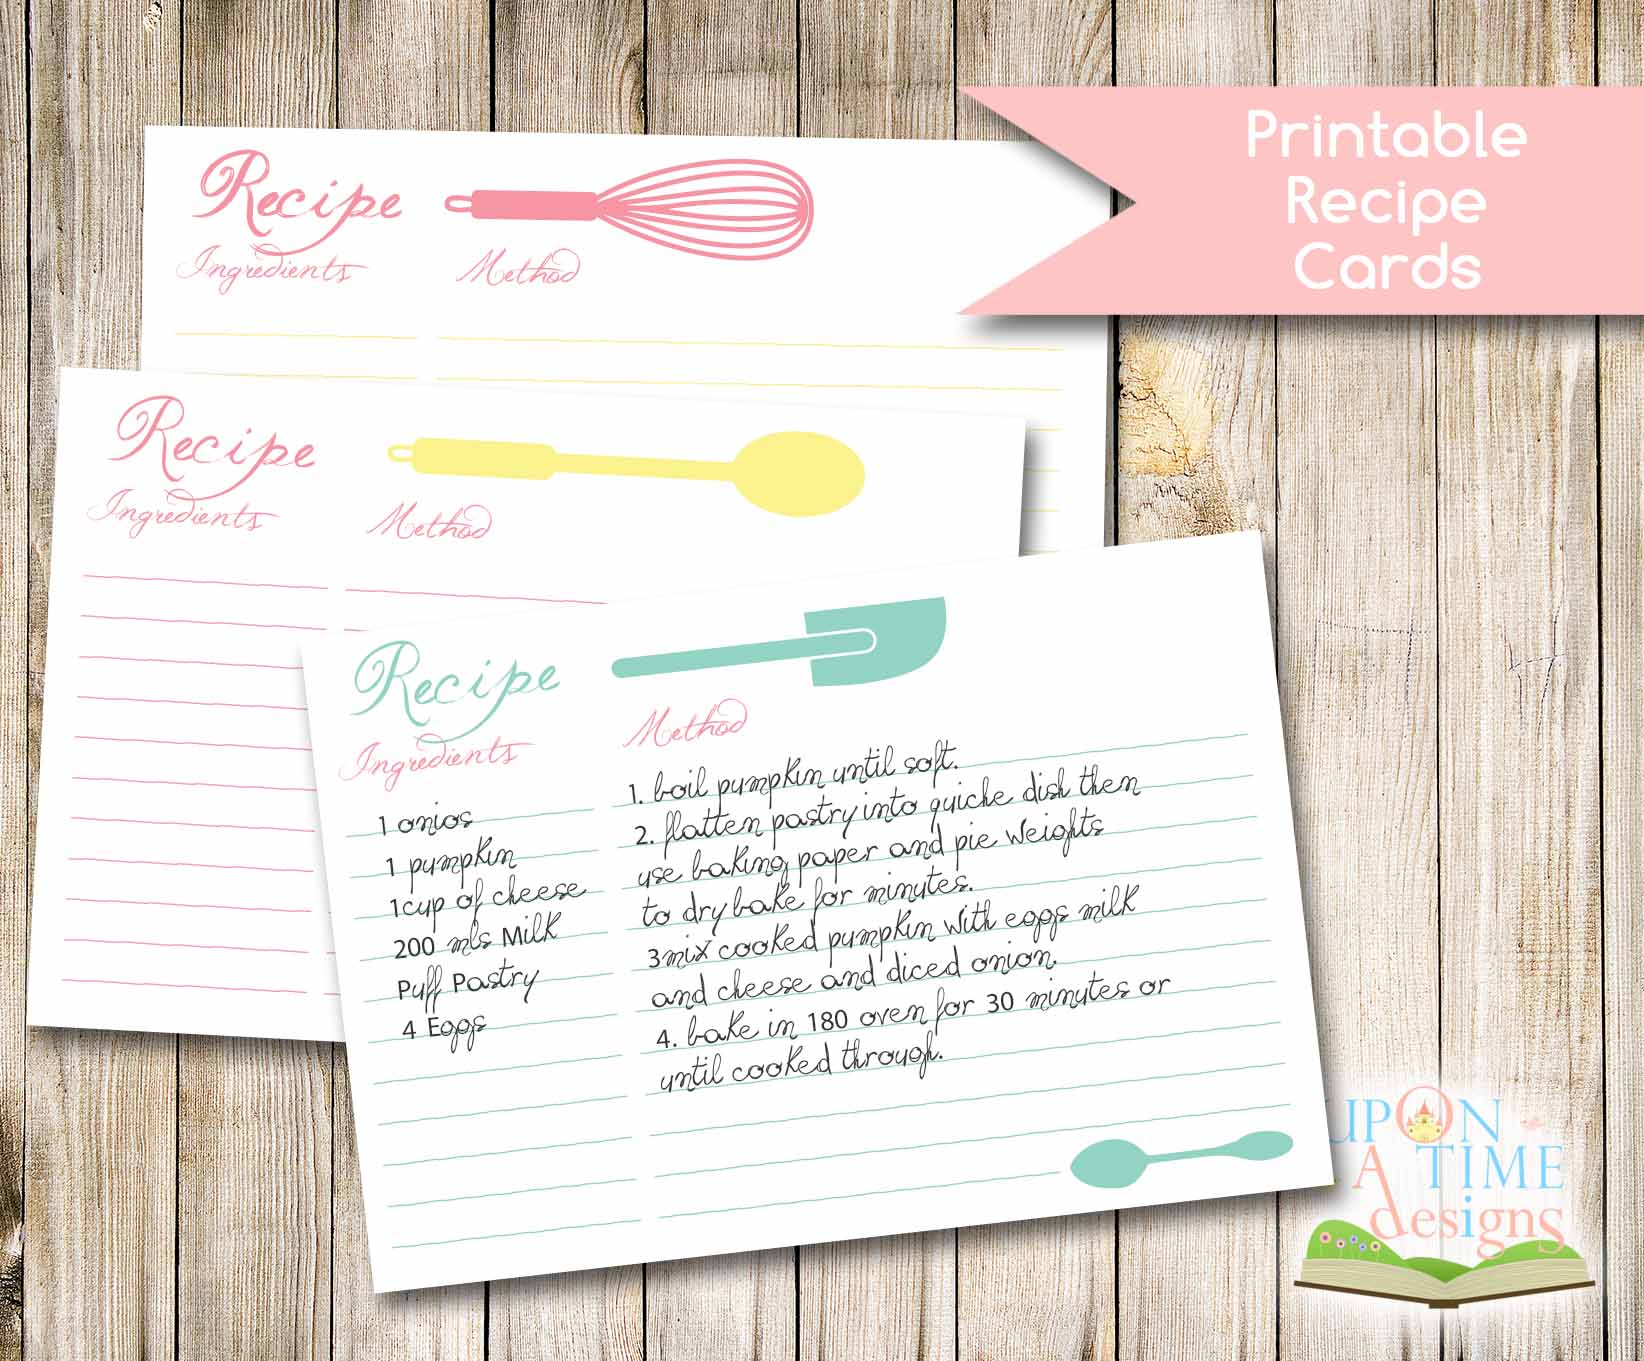 4 Best Images of Cute Printable Recipe Cards Free Printable Recipe